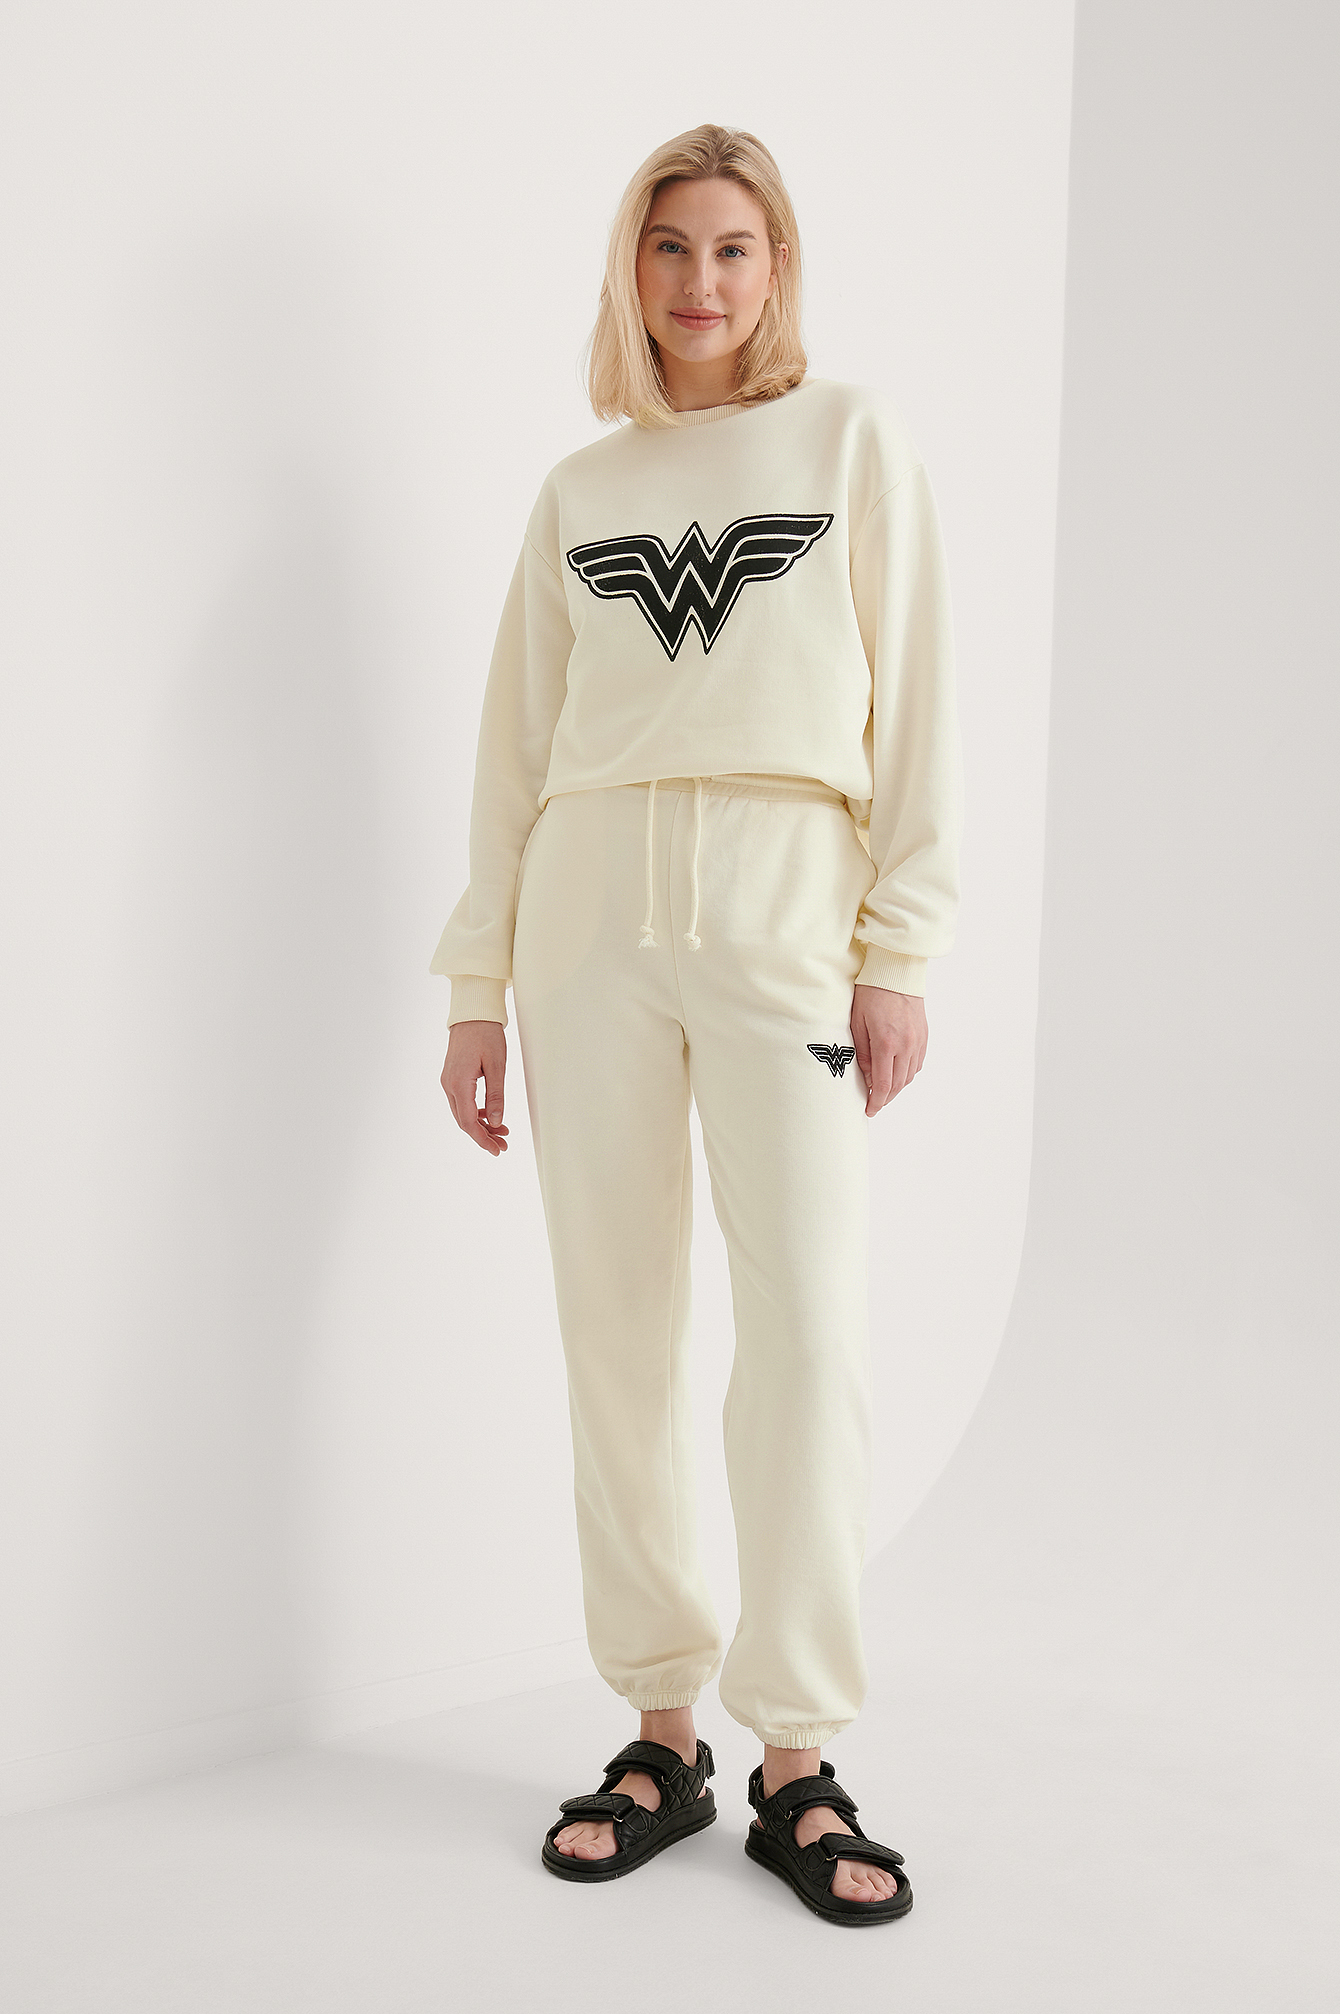 Wonder Woman Joggers Outfit.